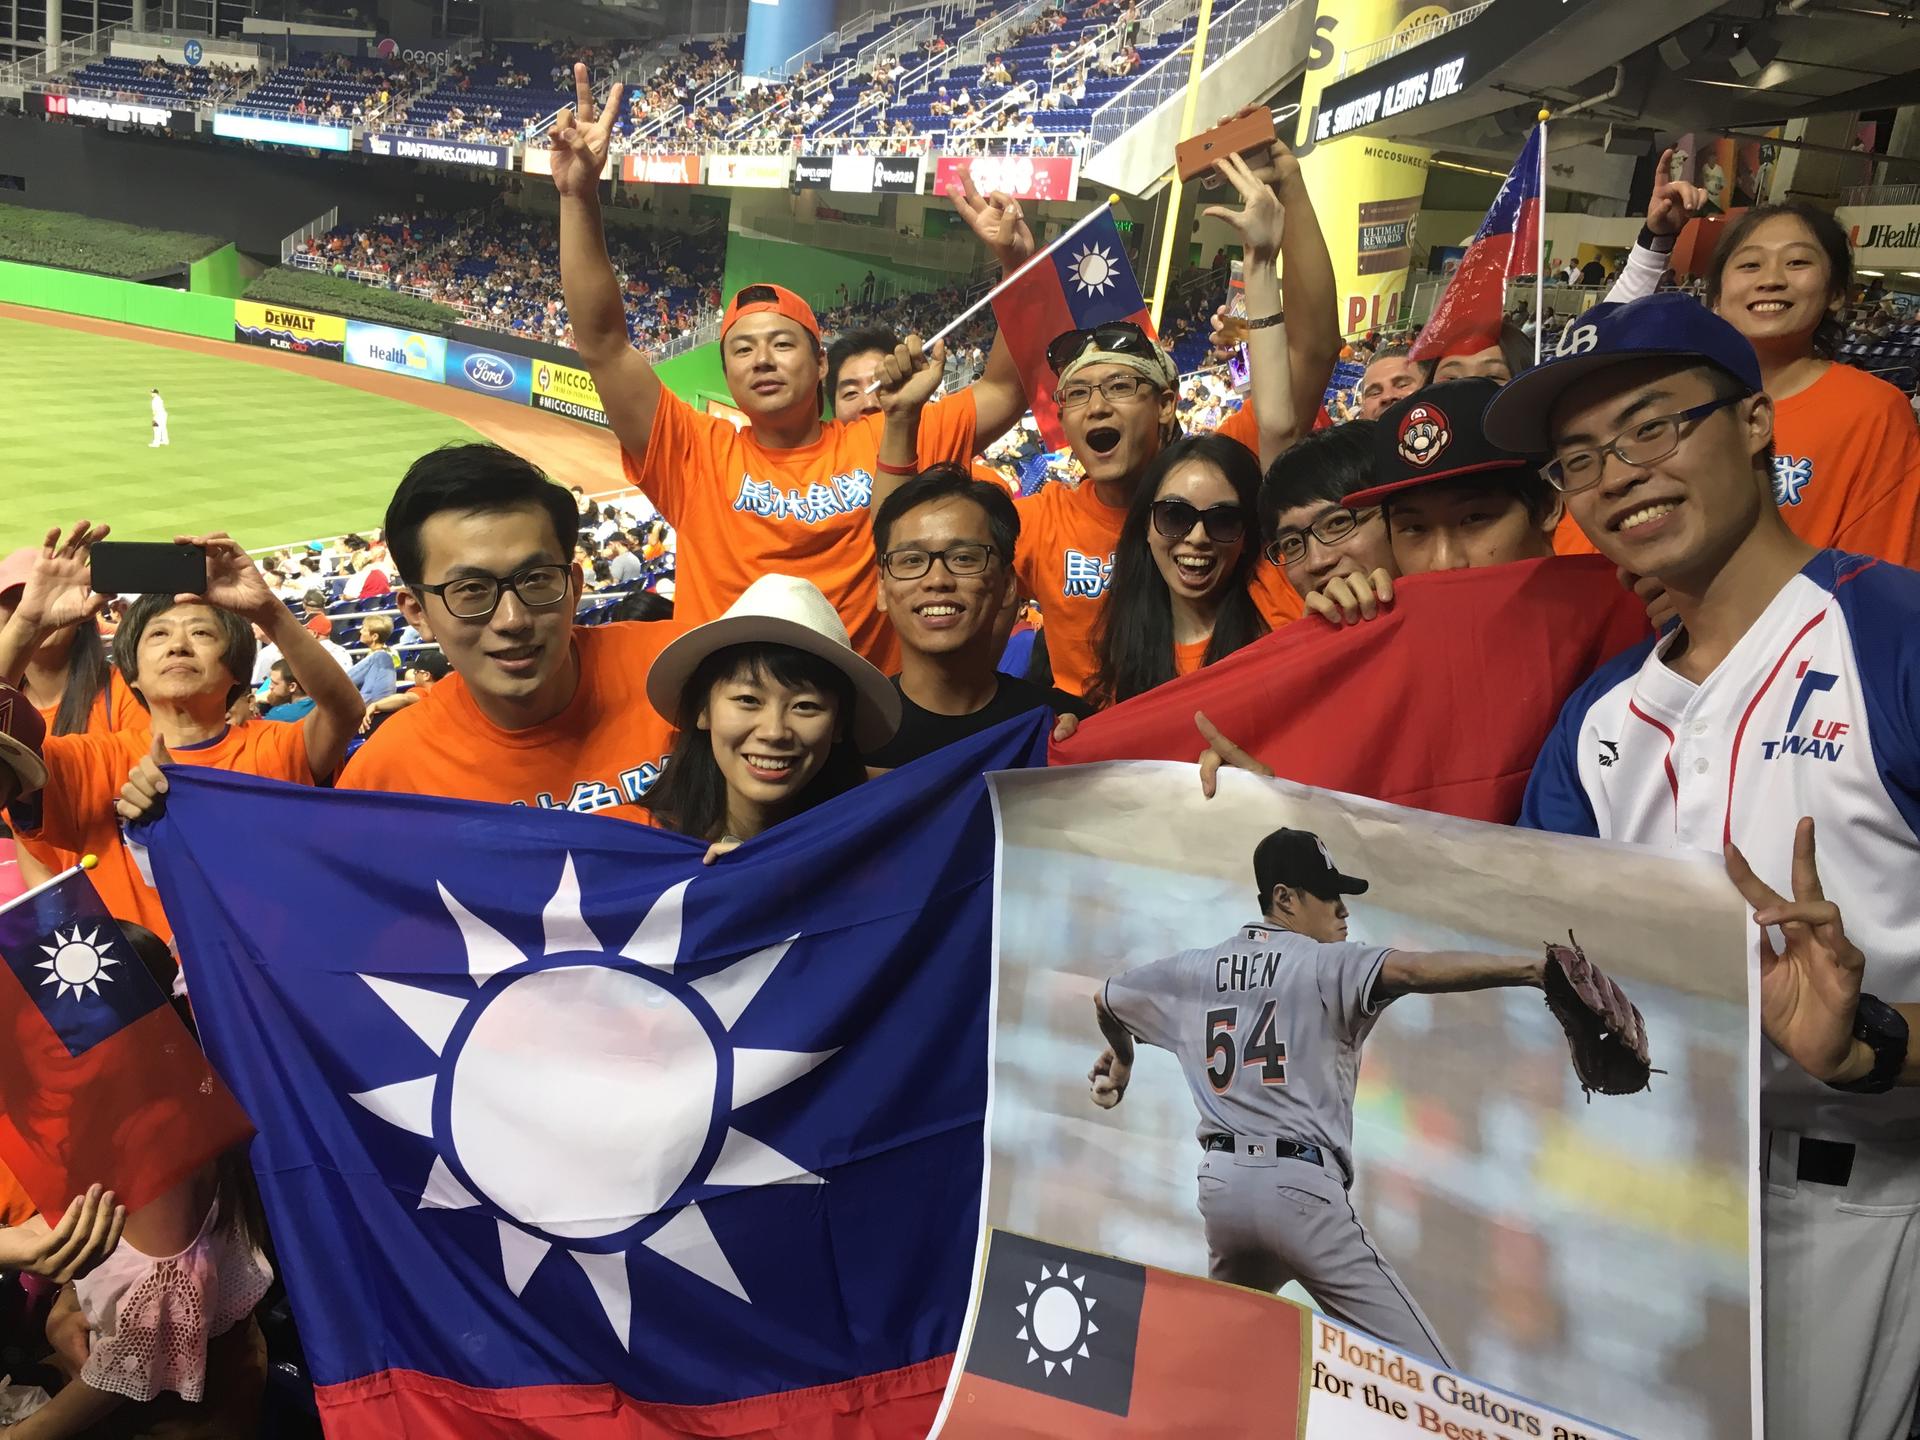 Henry Chen, on the far right holding the Chen sign, drove nearly 340 miles from Gainesville, Fla., to Miami to participate in Taiwanese Heritage Night at Marlins Park with some of his fellow students from Taiwan.